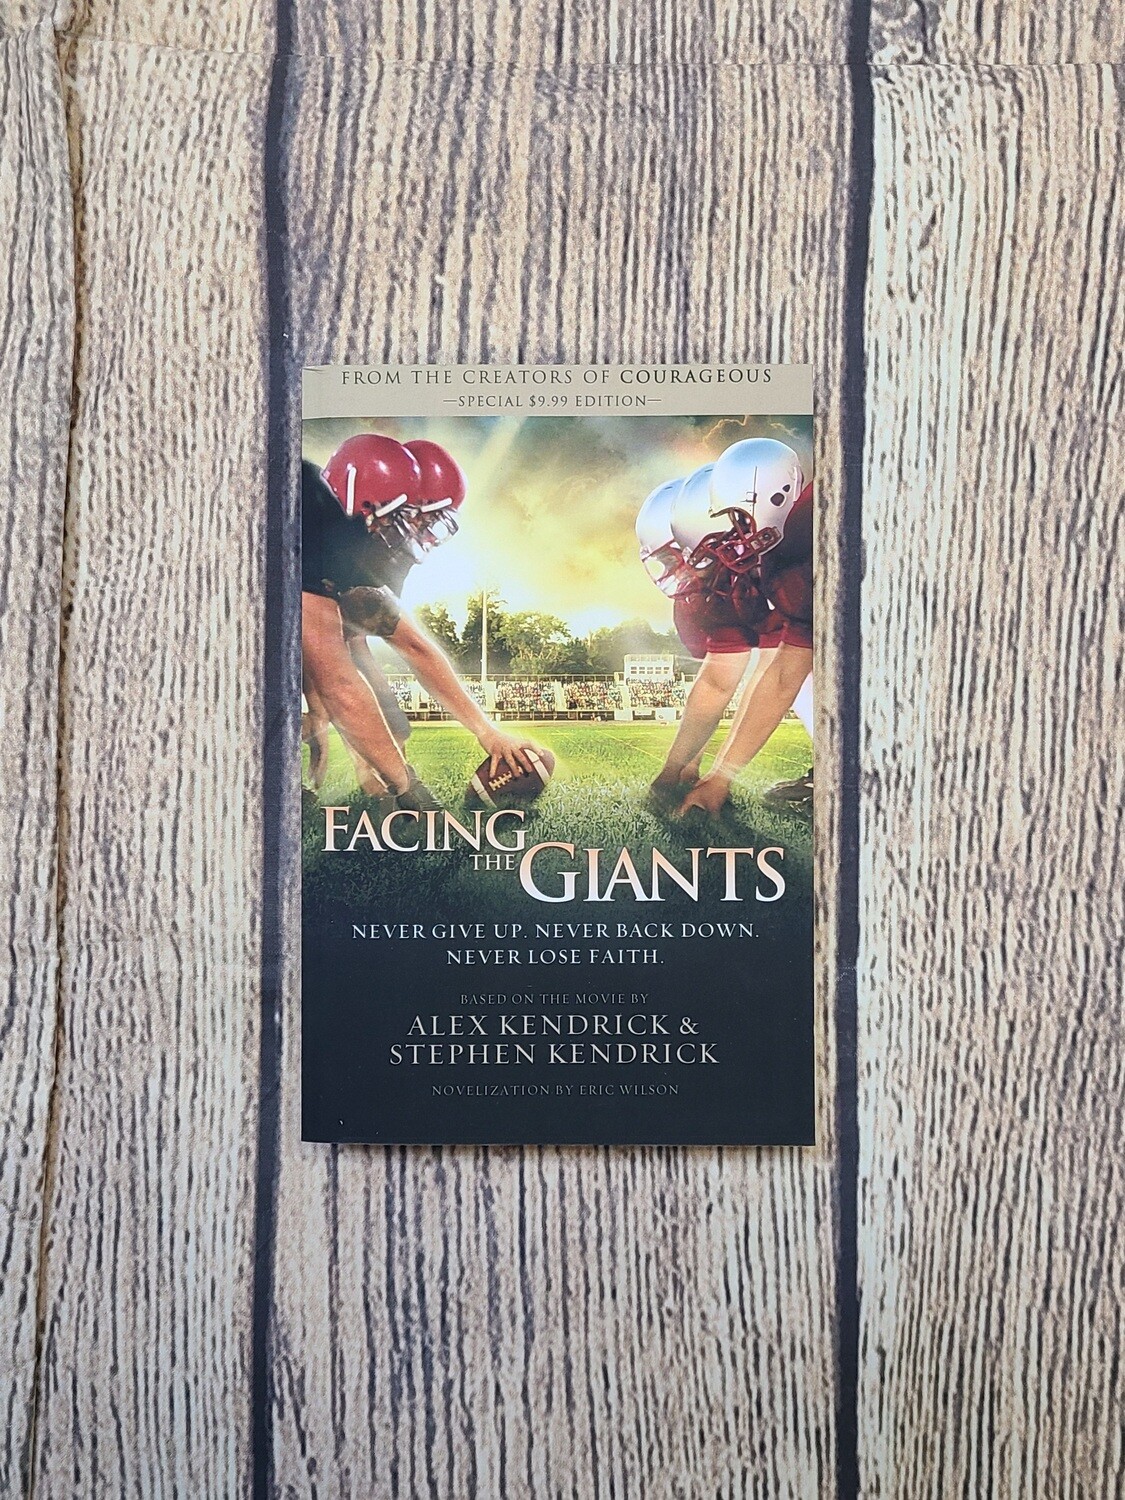 Facing the Giants by Eric Wilson - Paperback